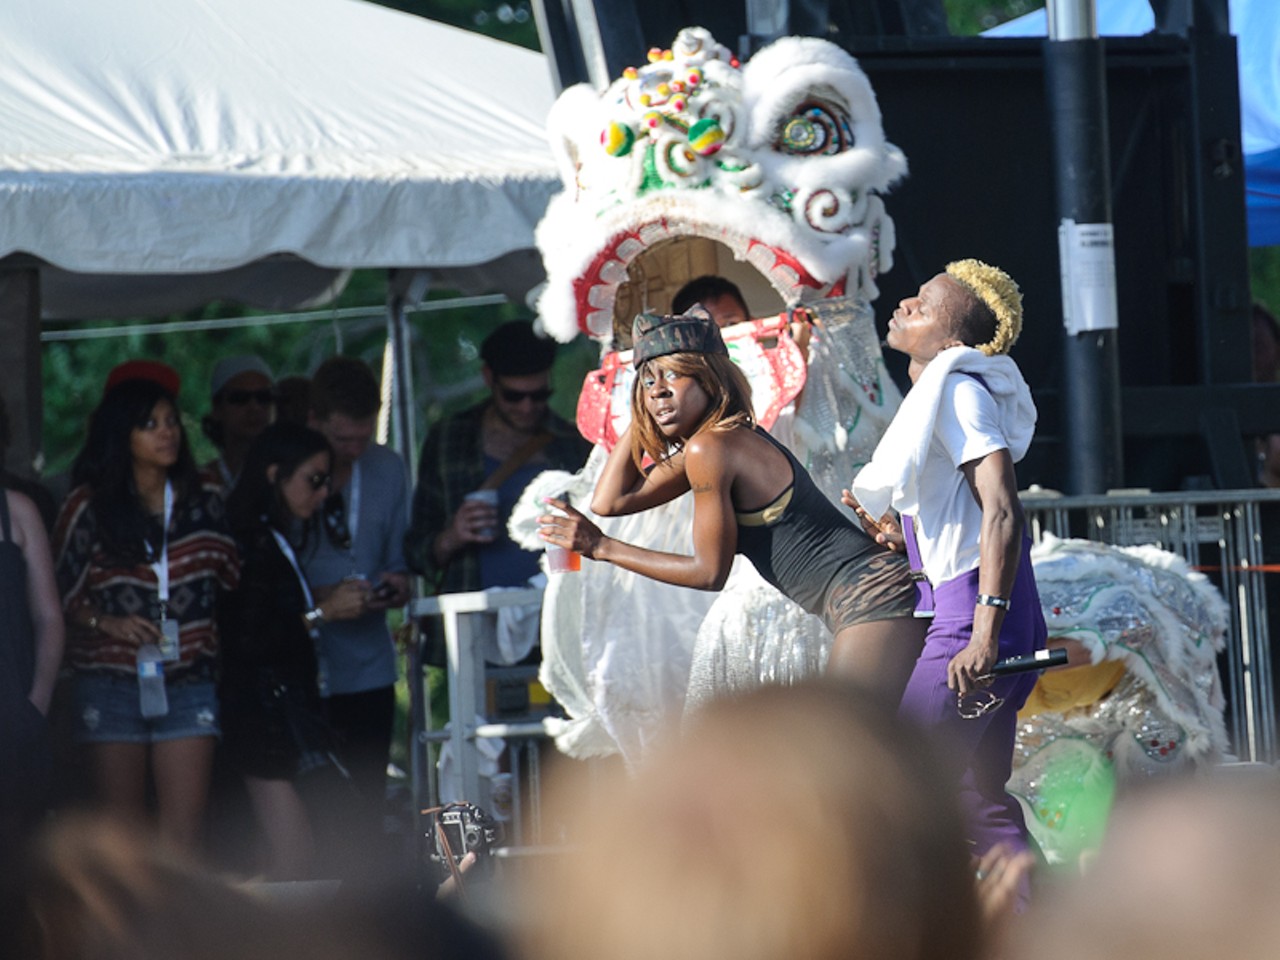 Major Lazer, booty, and a Chinese dragon at the Pitchfork Music Festival 2010 in Chicago.